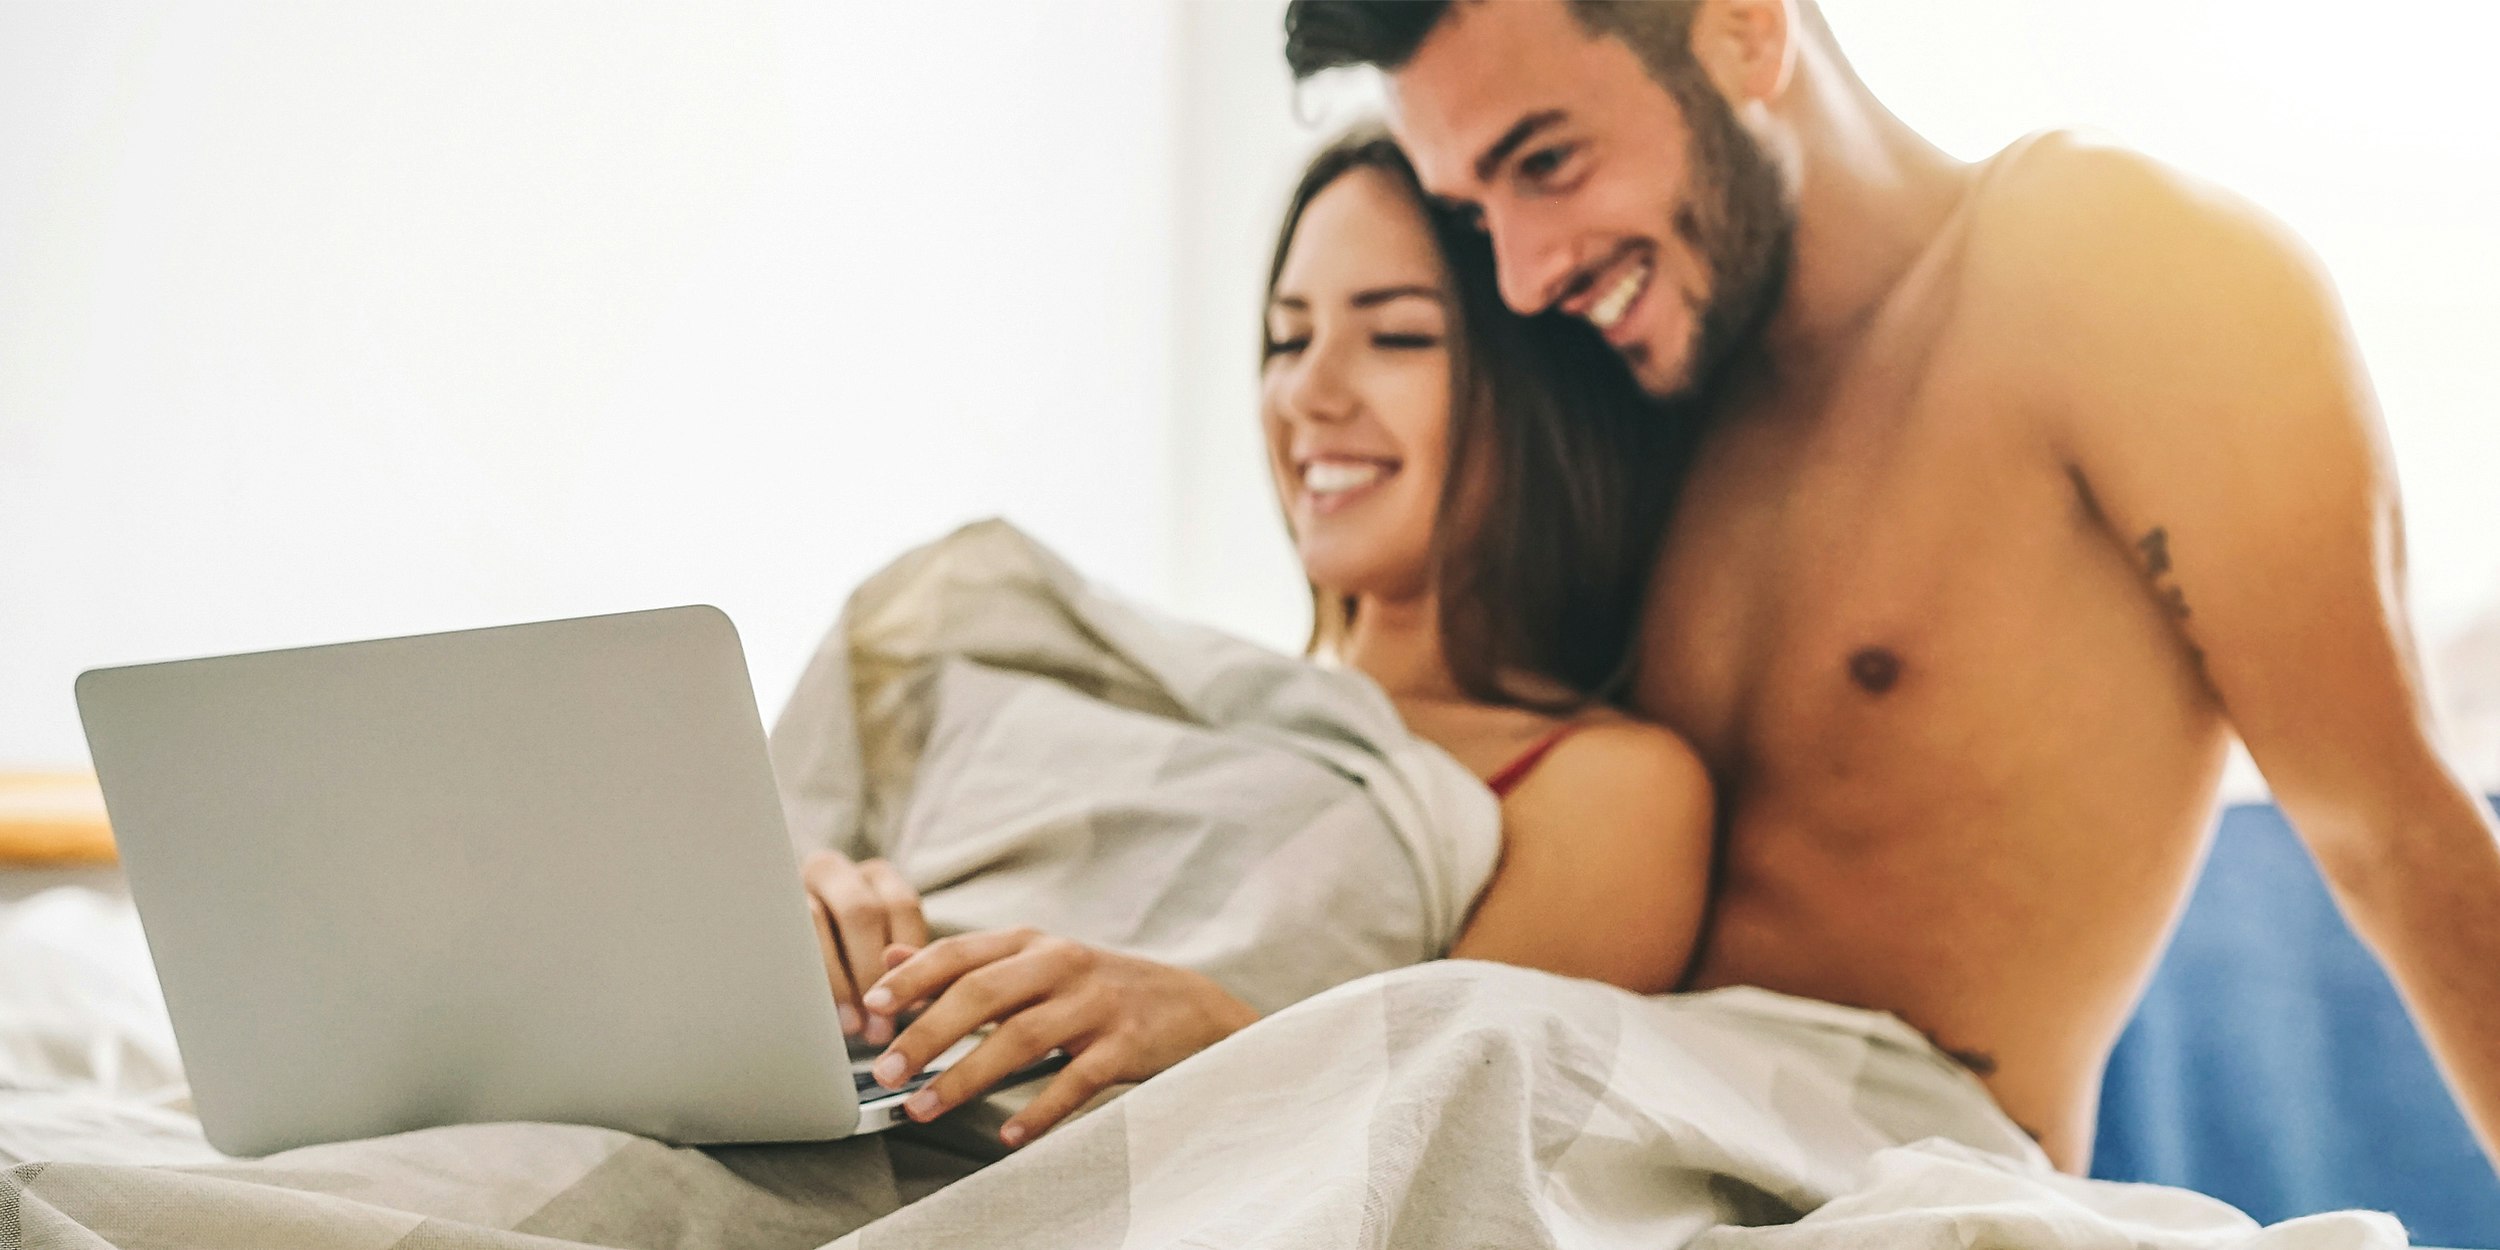 Porn For Couples The Best Couple Porn to Watch and Explore Together photo